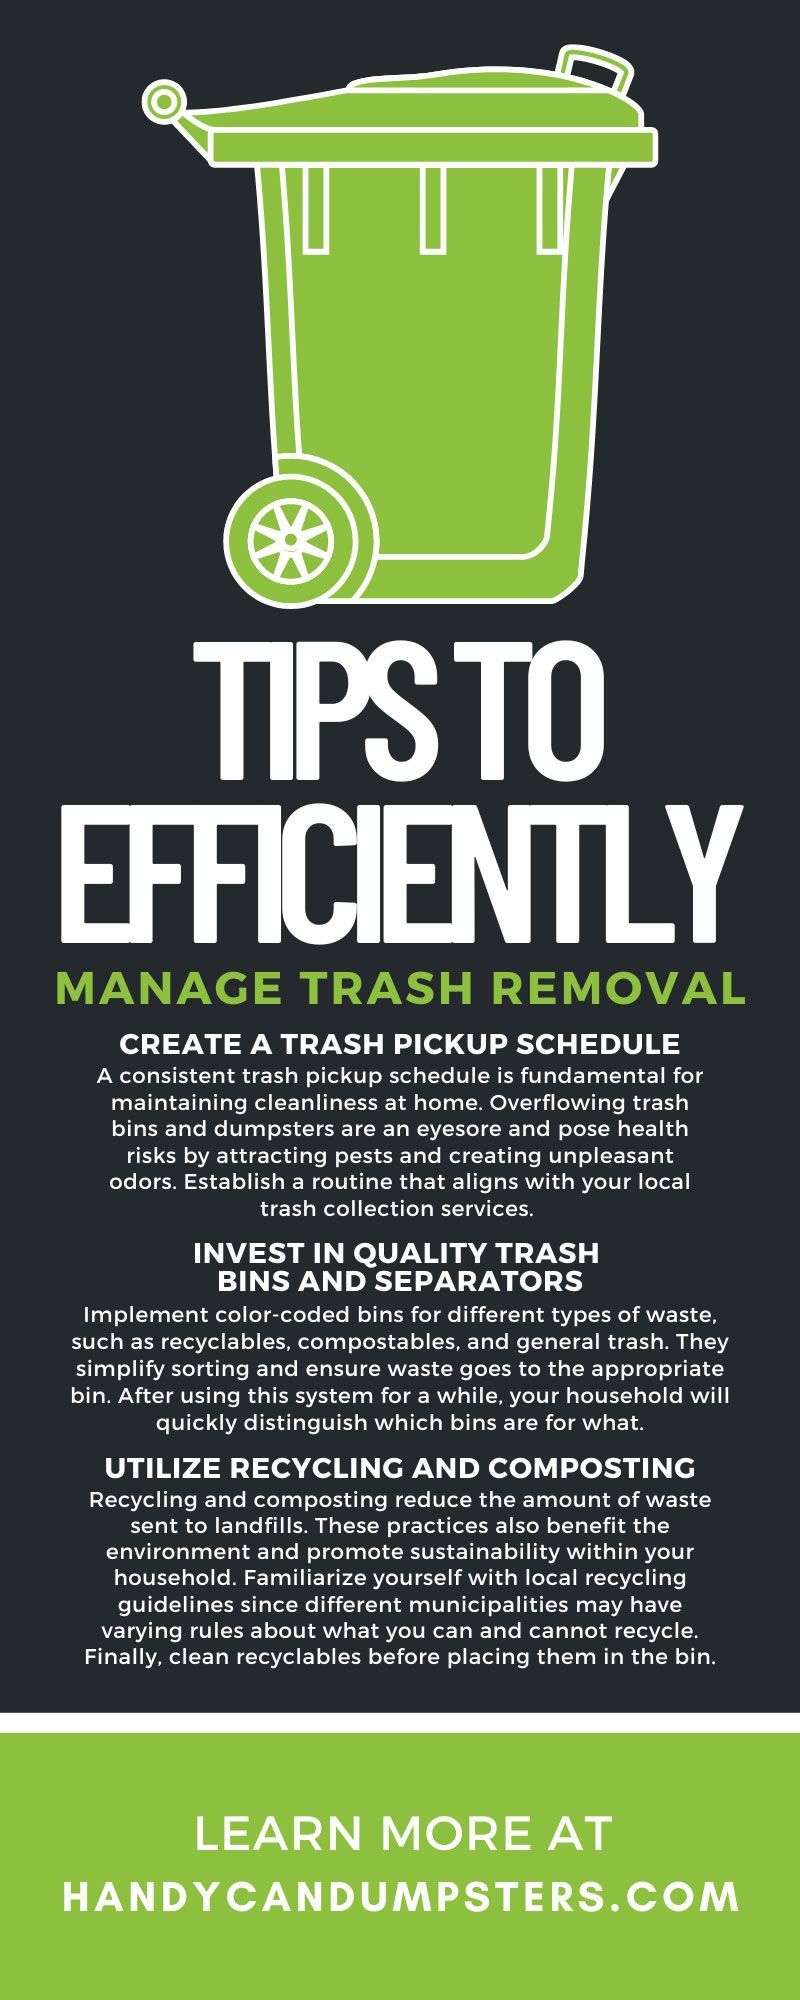 5 Tips To Efficiently Manage Trash Removal